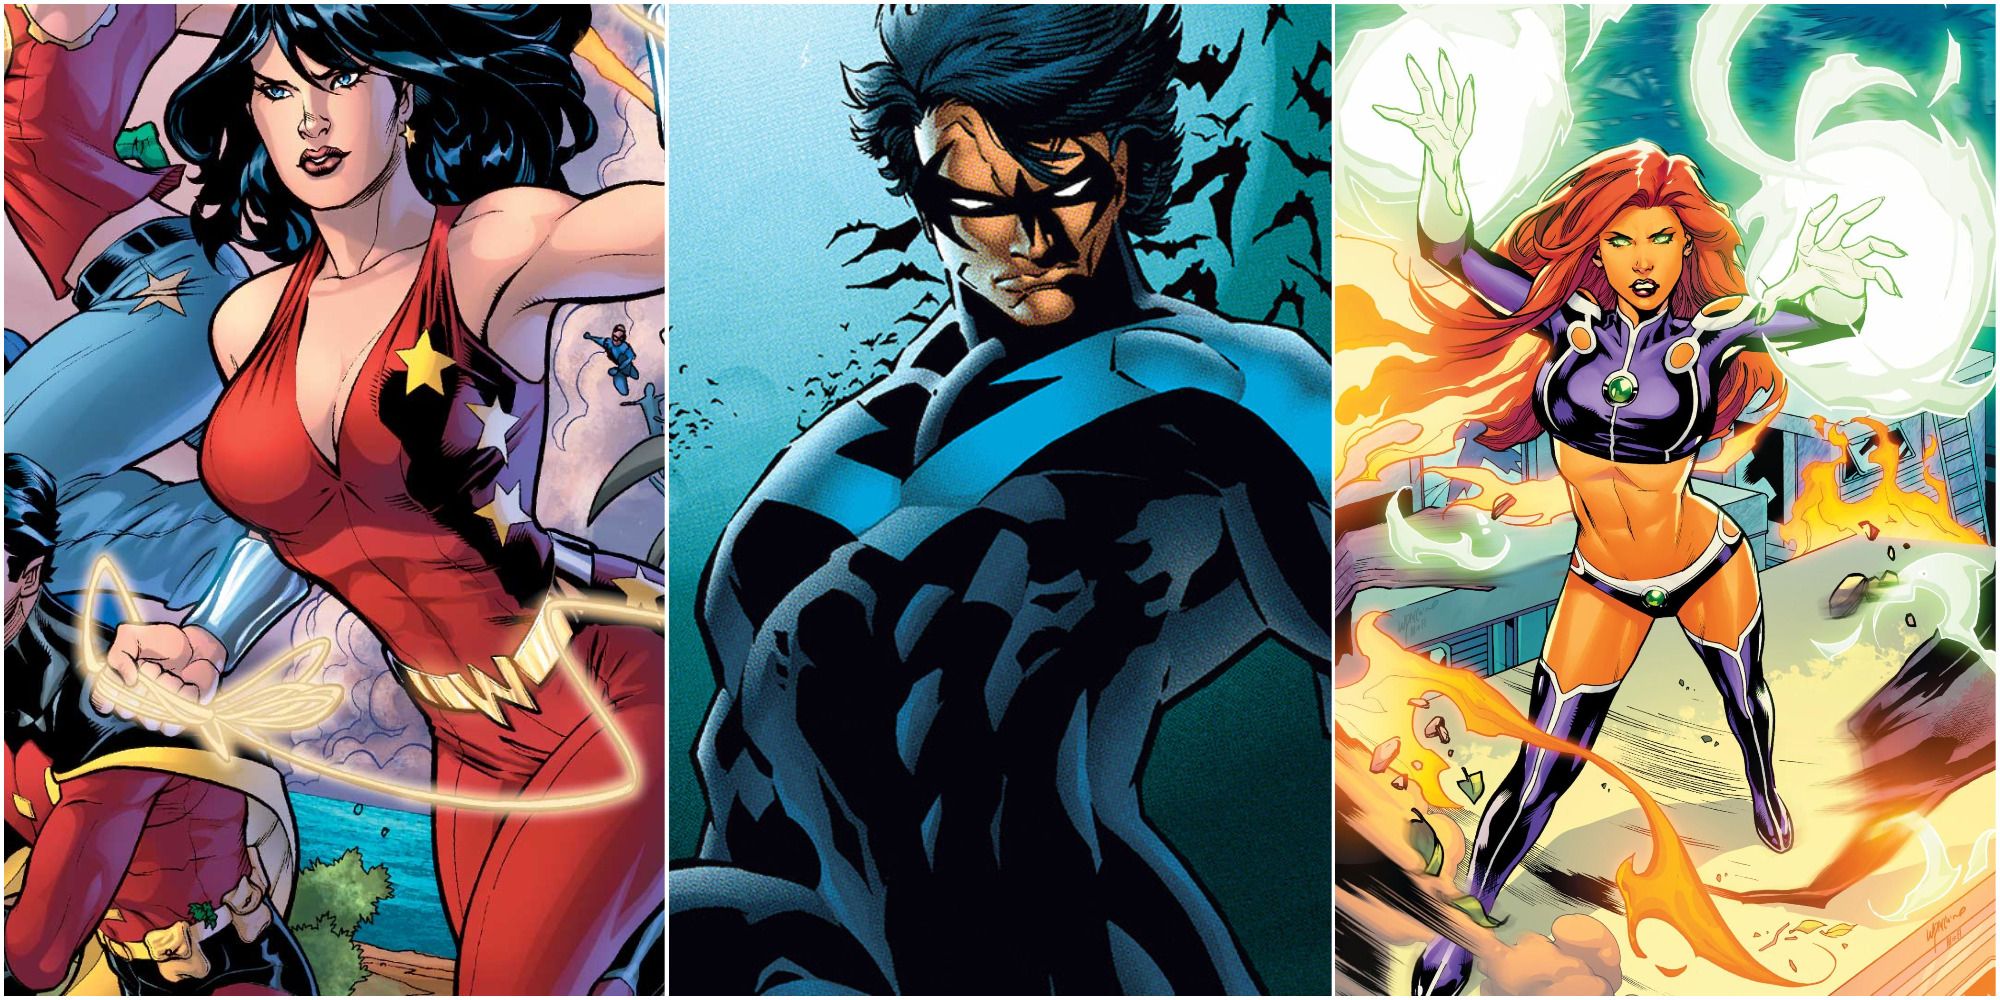 Donna Troy, Nightwing, and Starfire